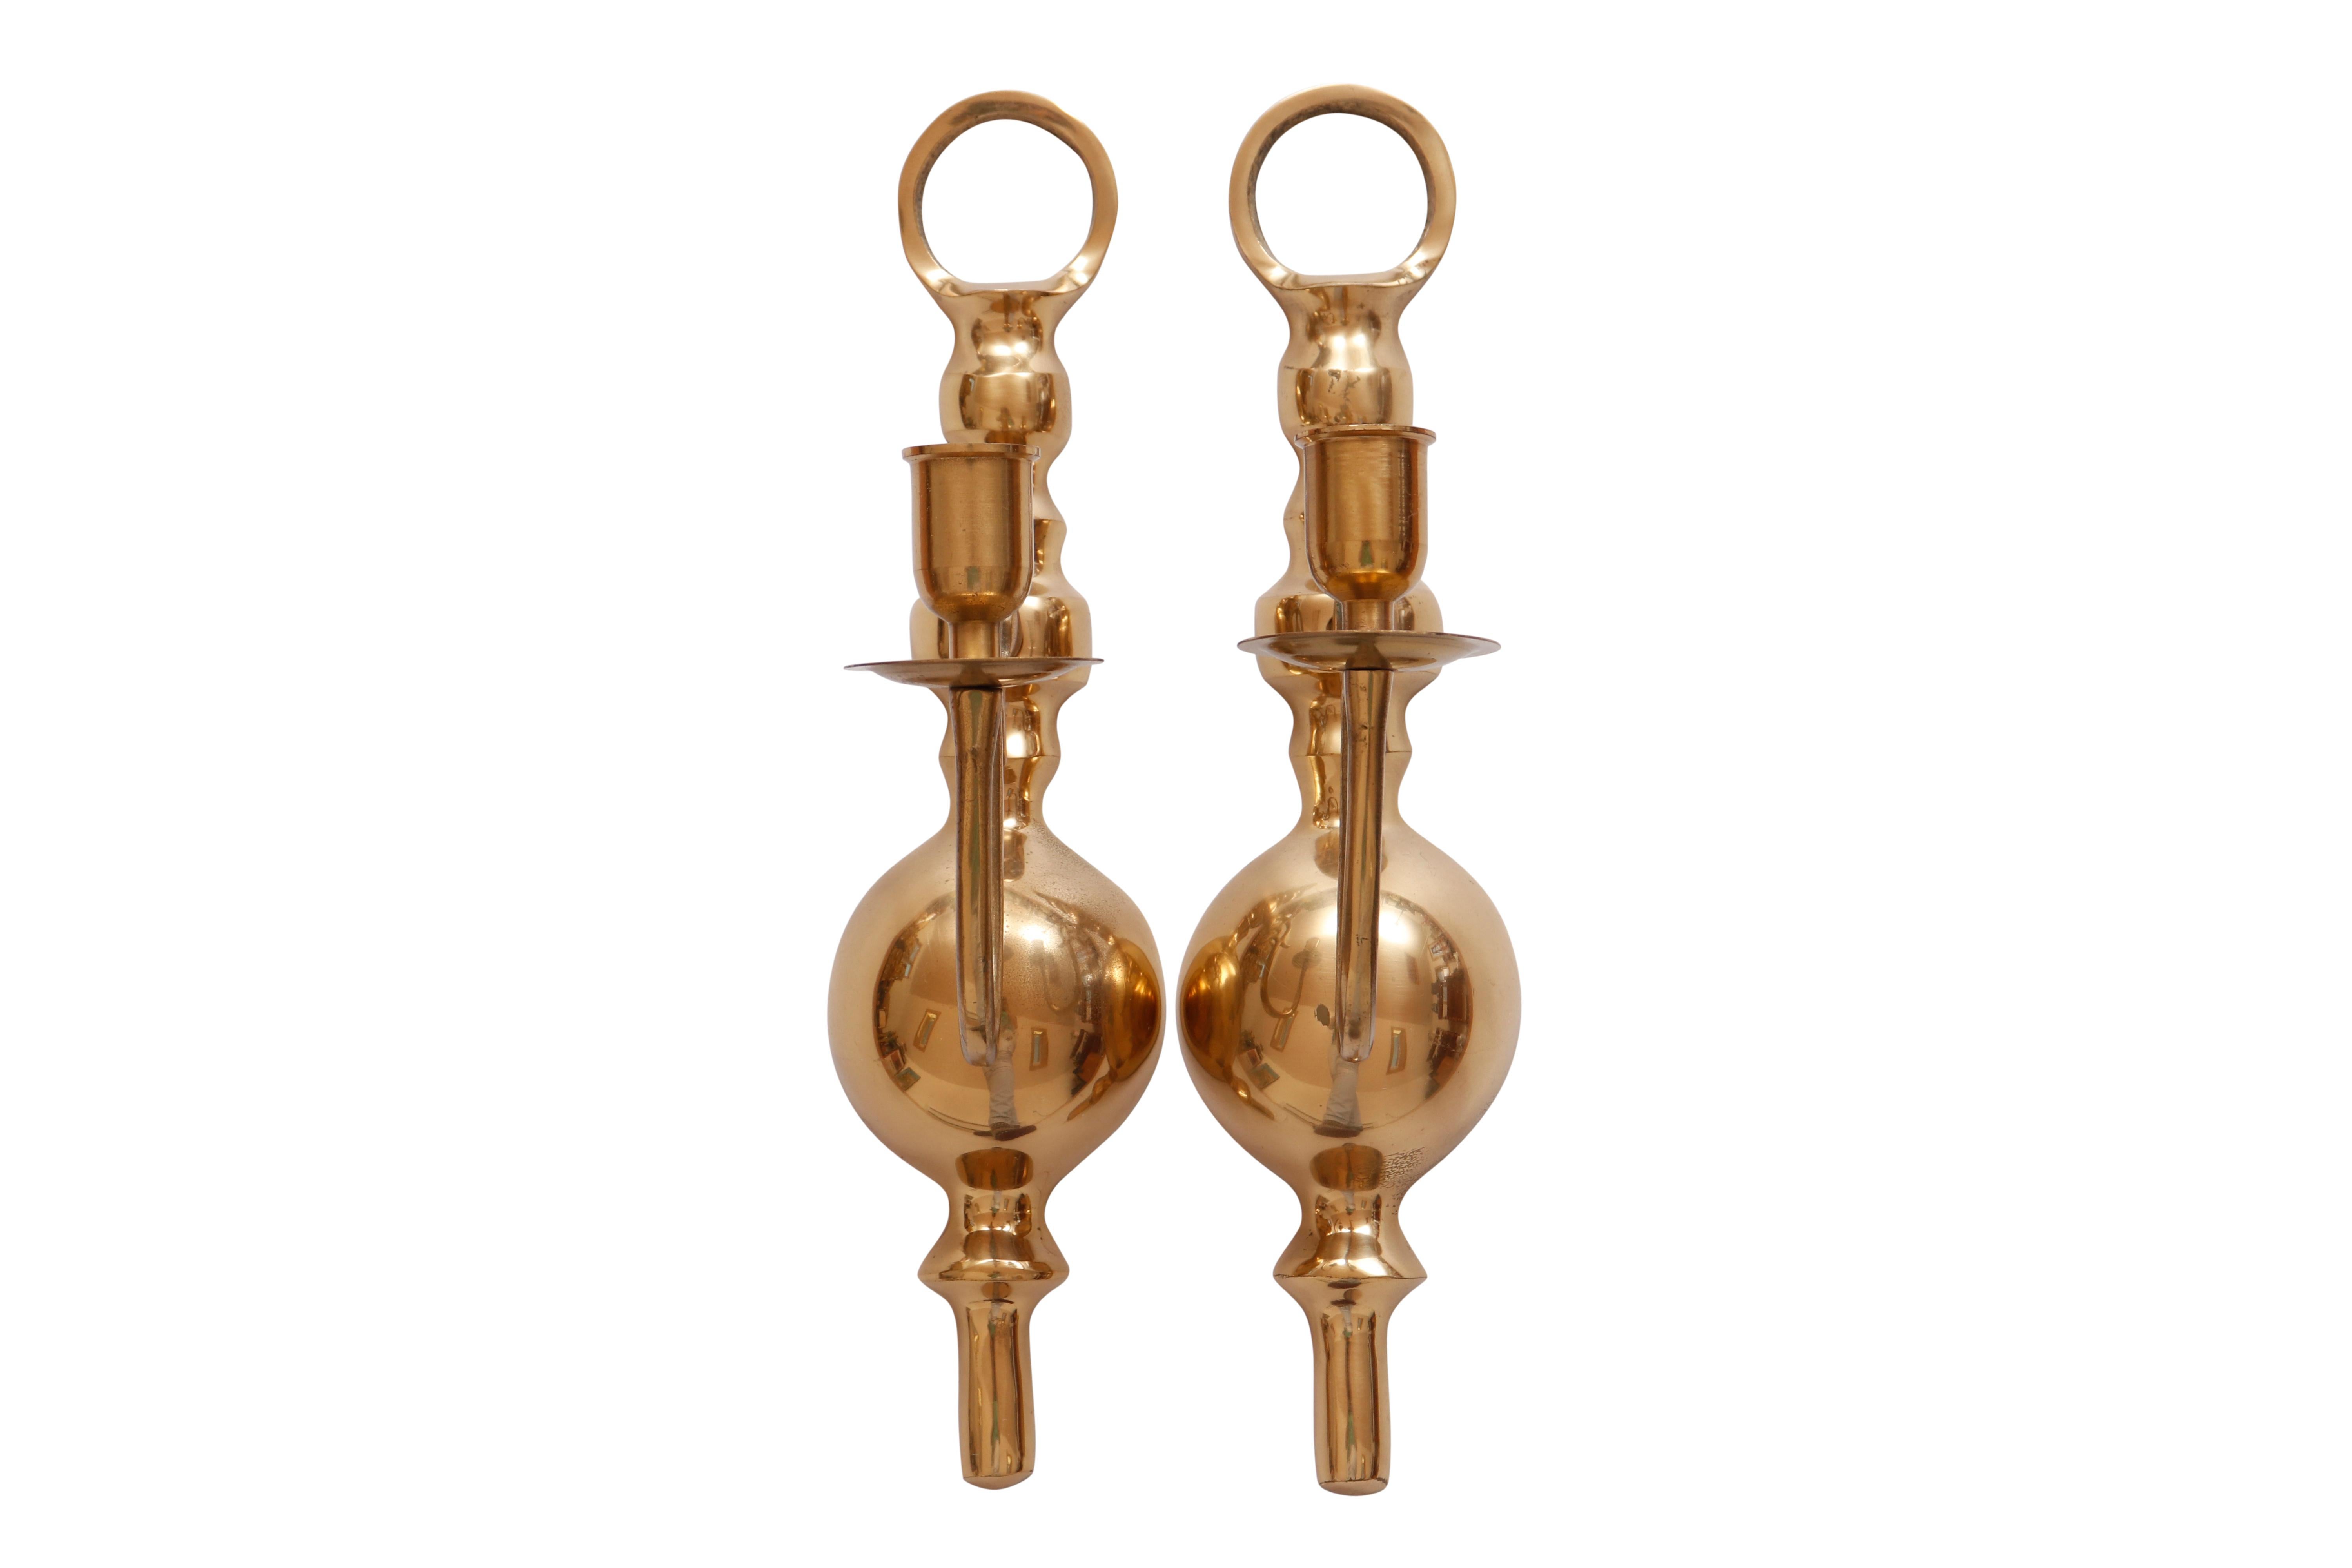 A pair of colonial style brass candle sconces. Decorative baluster shaped backplates support slender arms with scrolled backs. Finished with sleek capitals and bobeches. Dimensions per sconce.